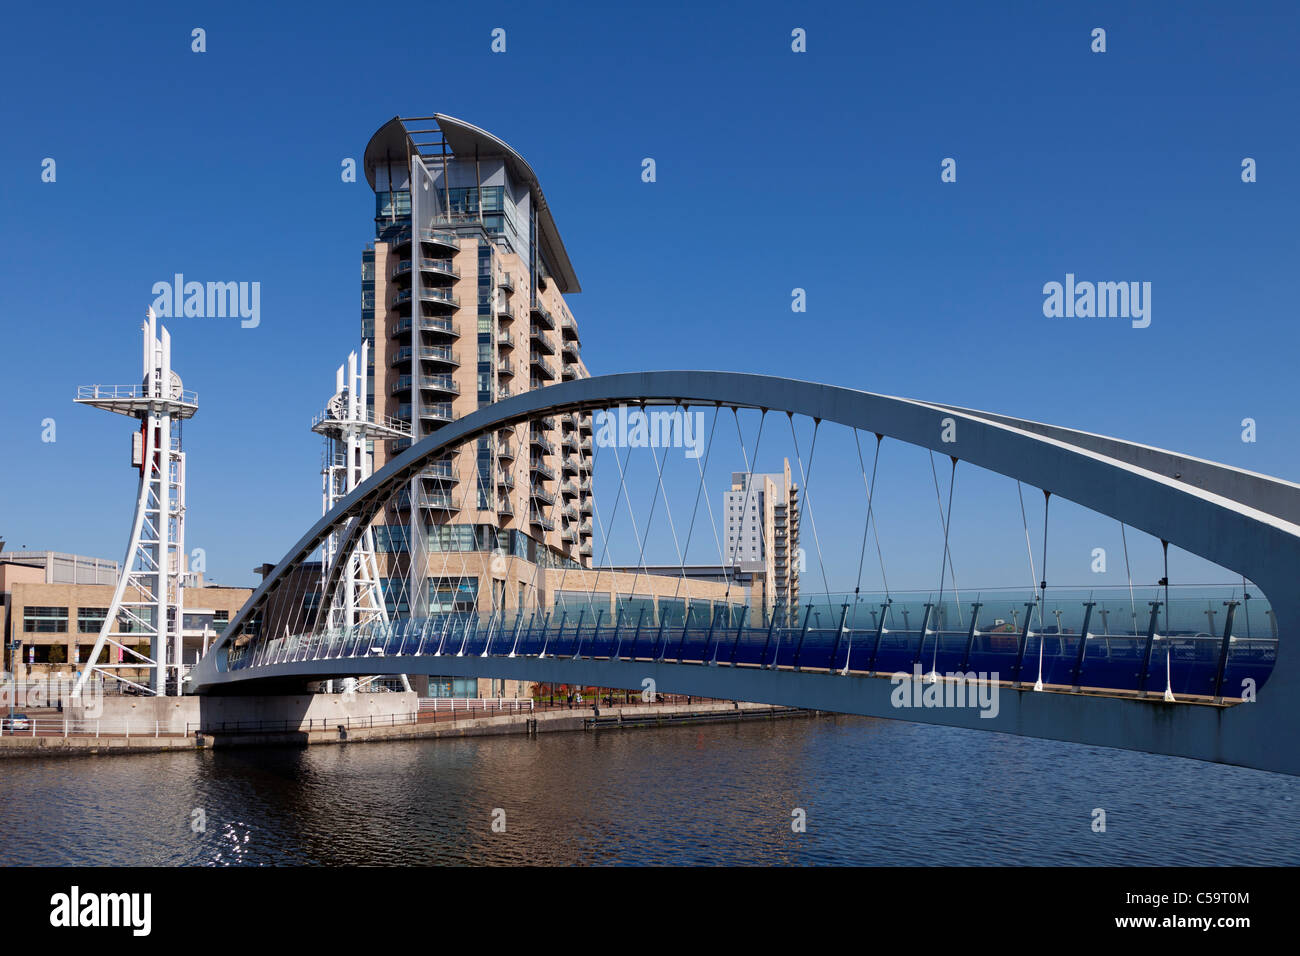 View across Lowry Bridge towards Lowry Theatre and lowry Outlet Mall, Salford quays, Greater Manchester, England Stock Photo